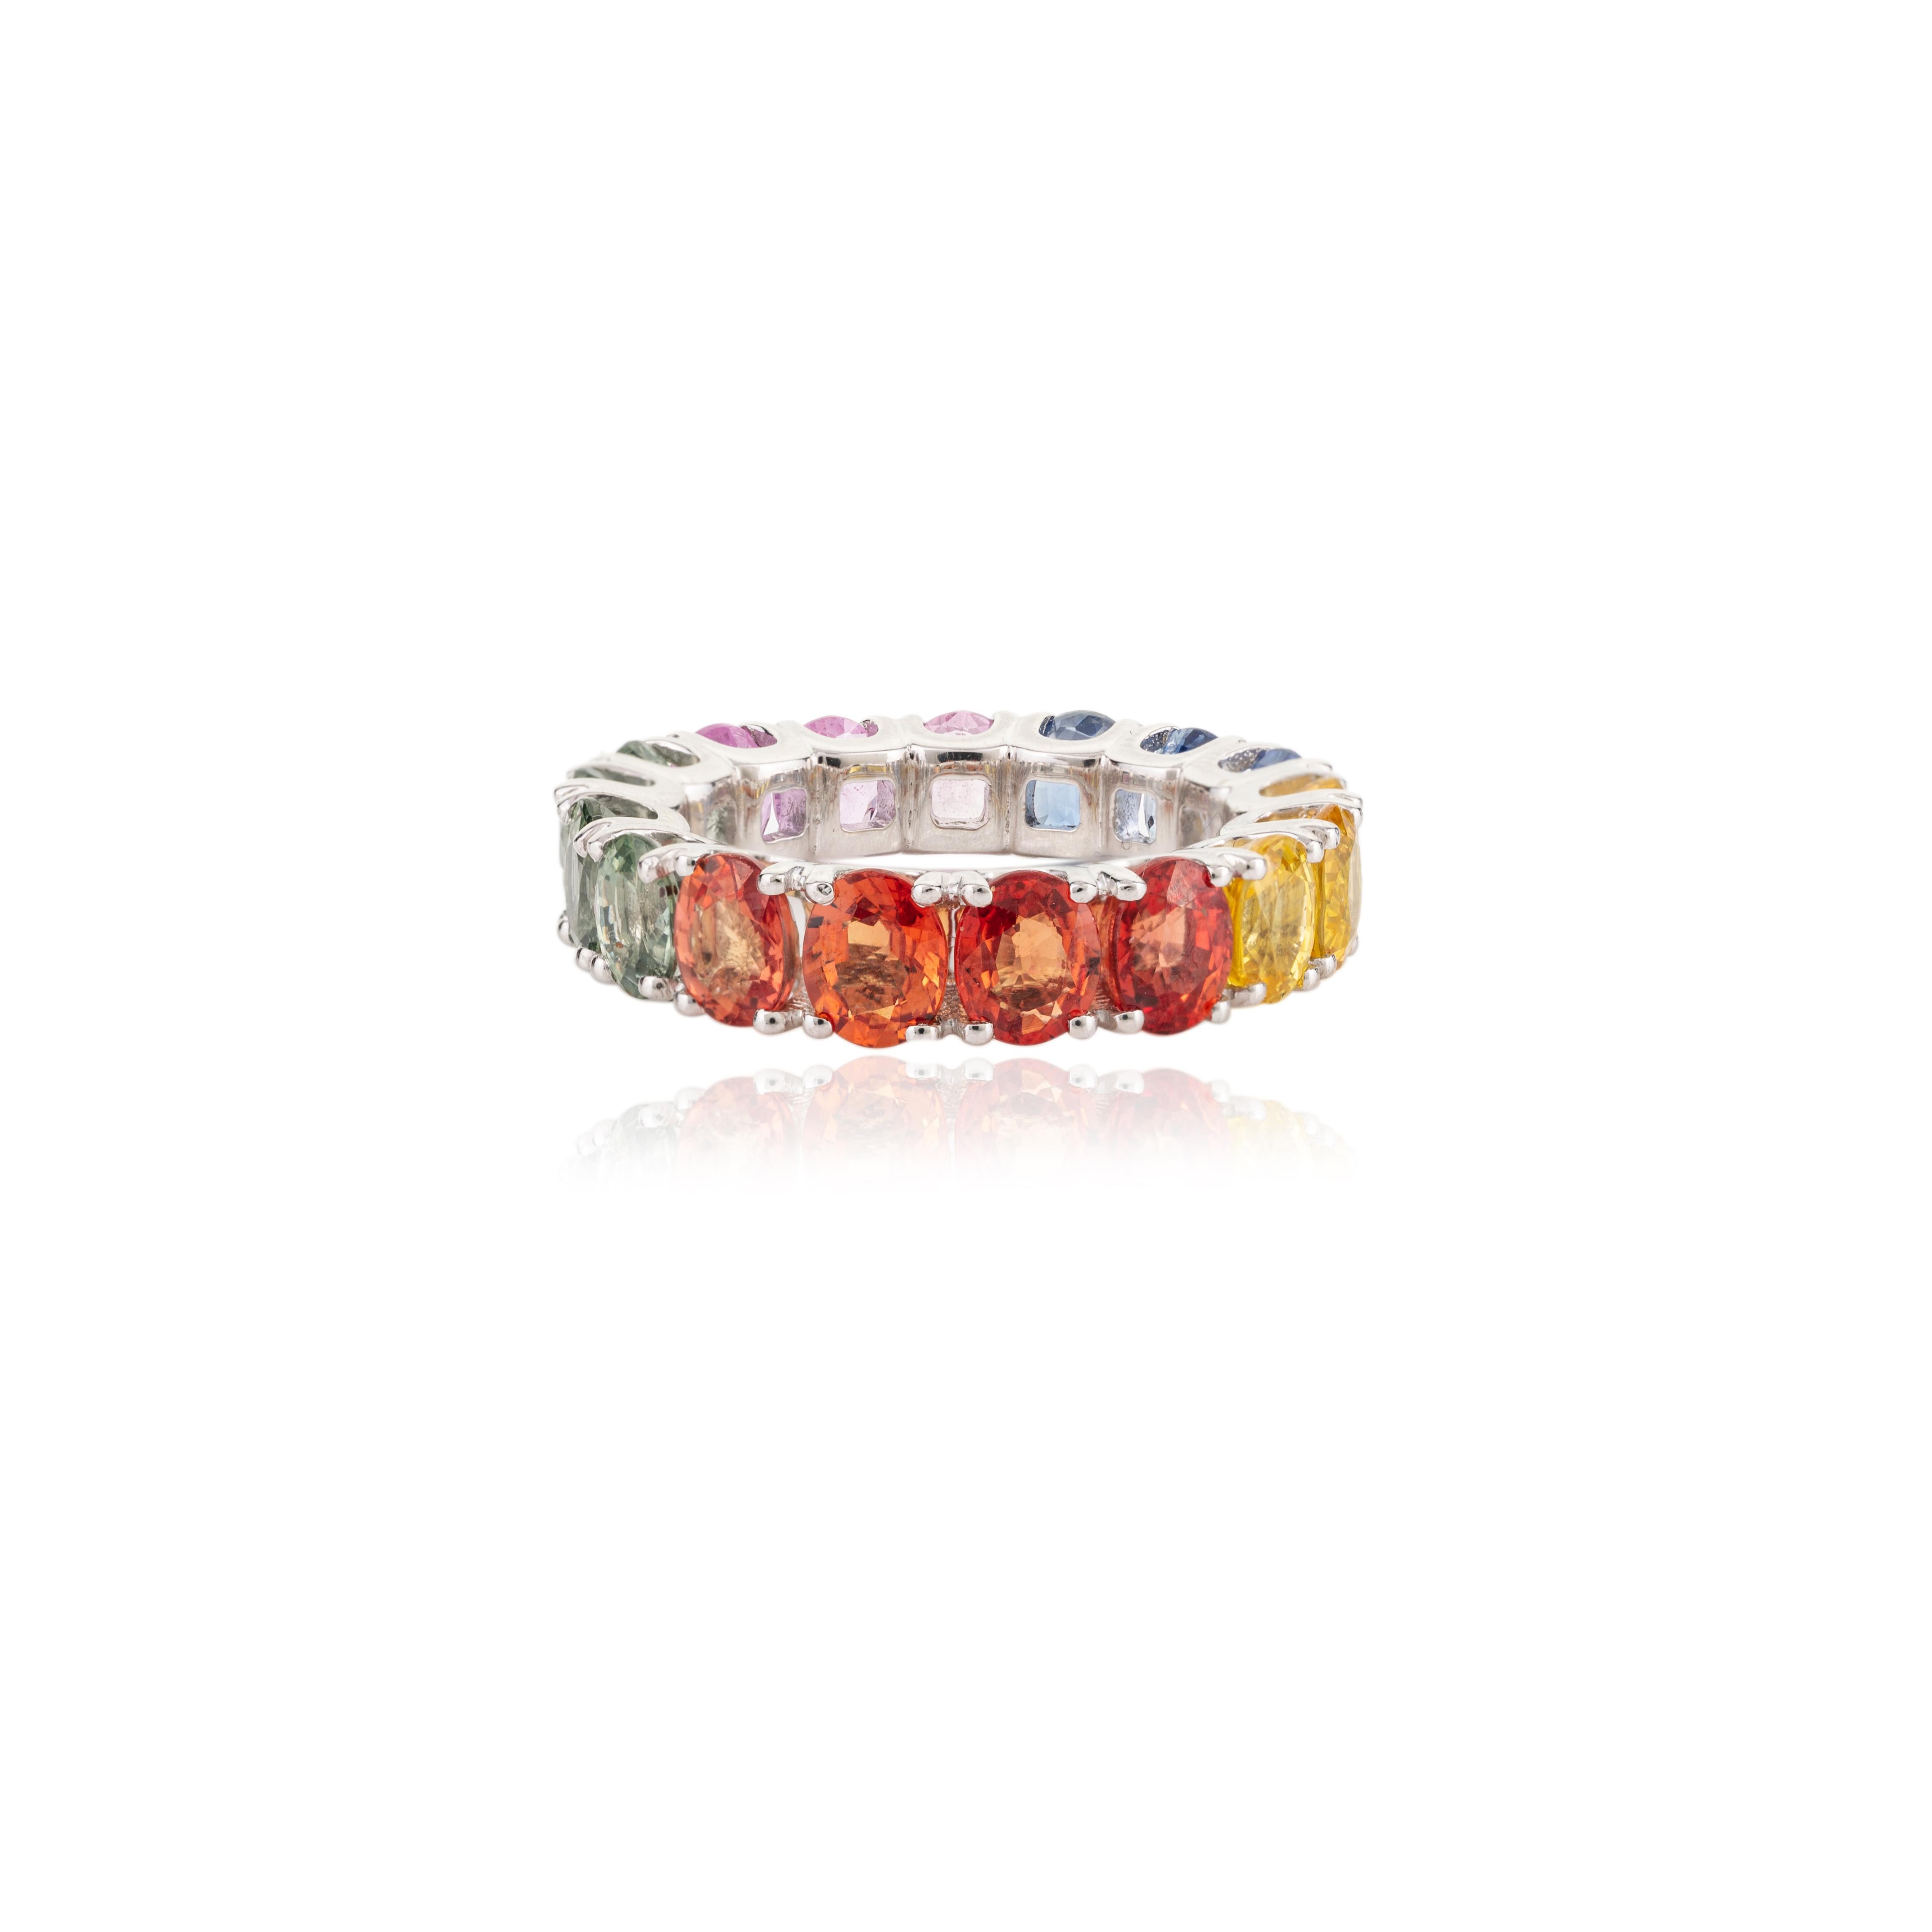 For Sale:  8.51 Carat Multi Colored Oval Sapphire 18k White Gold Eternity Band Ring 5